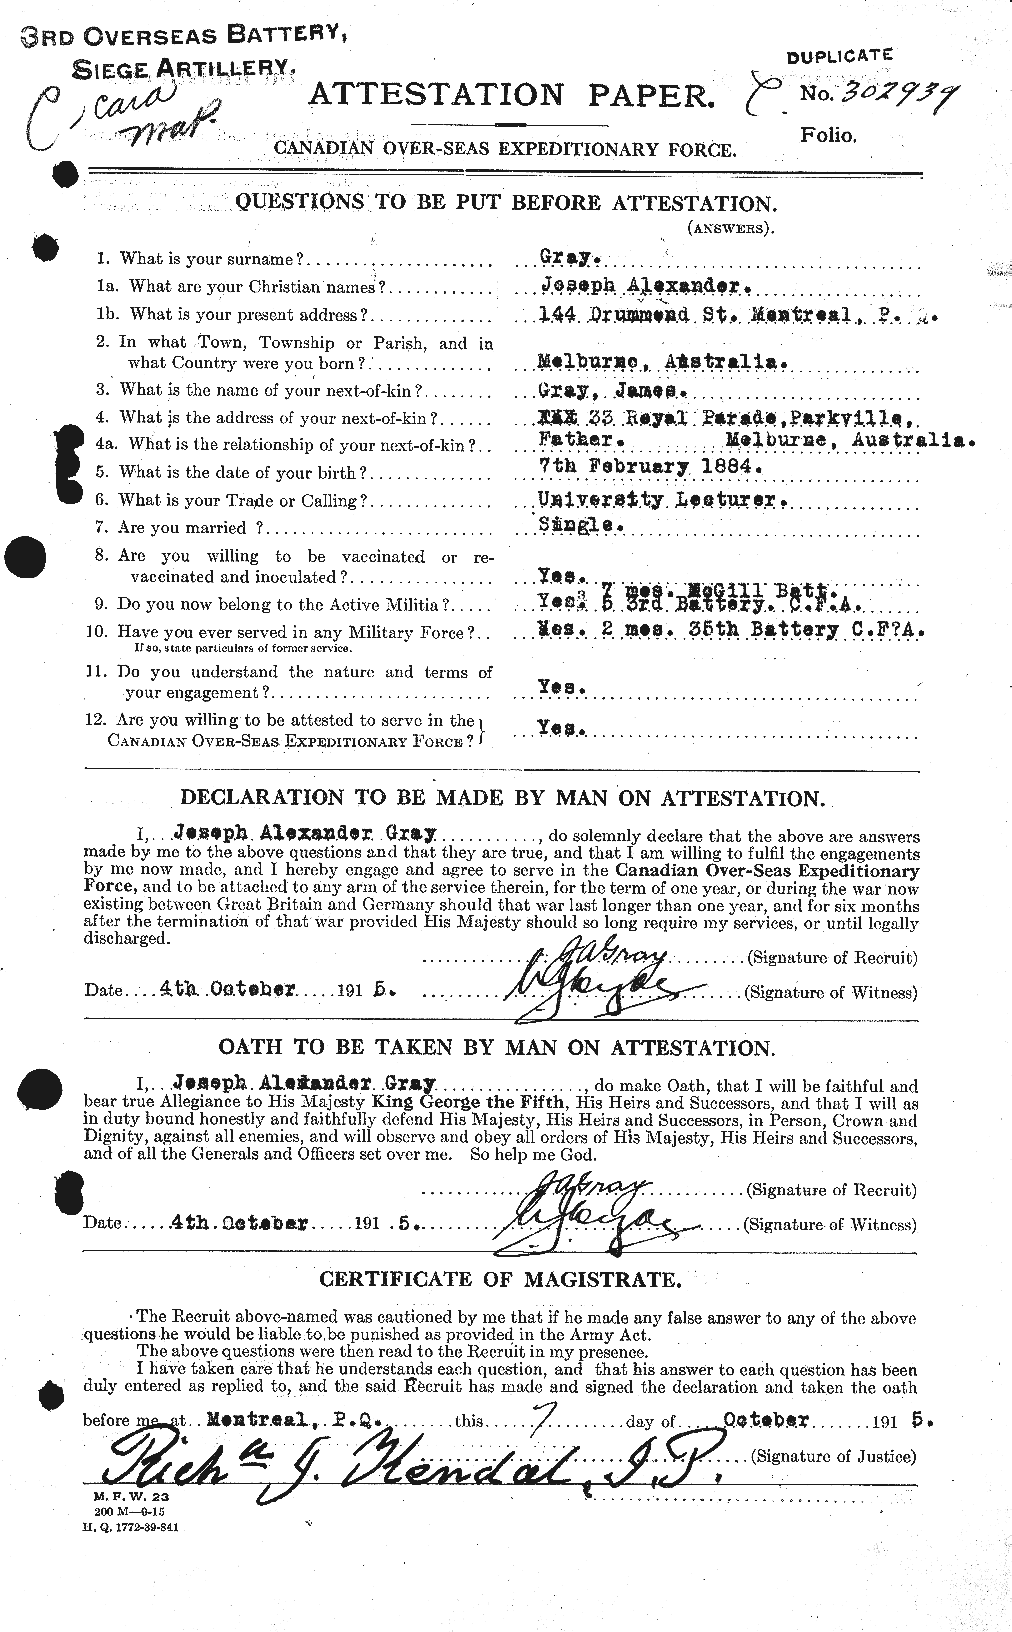 Personnel Records of the First World War - CEF 363412a